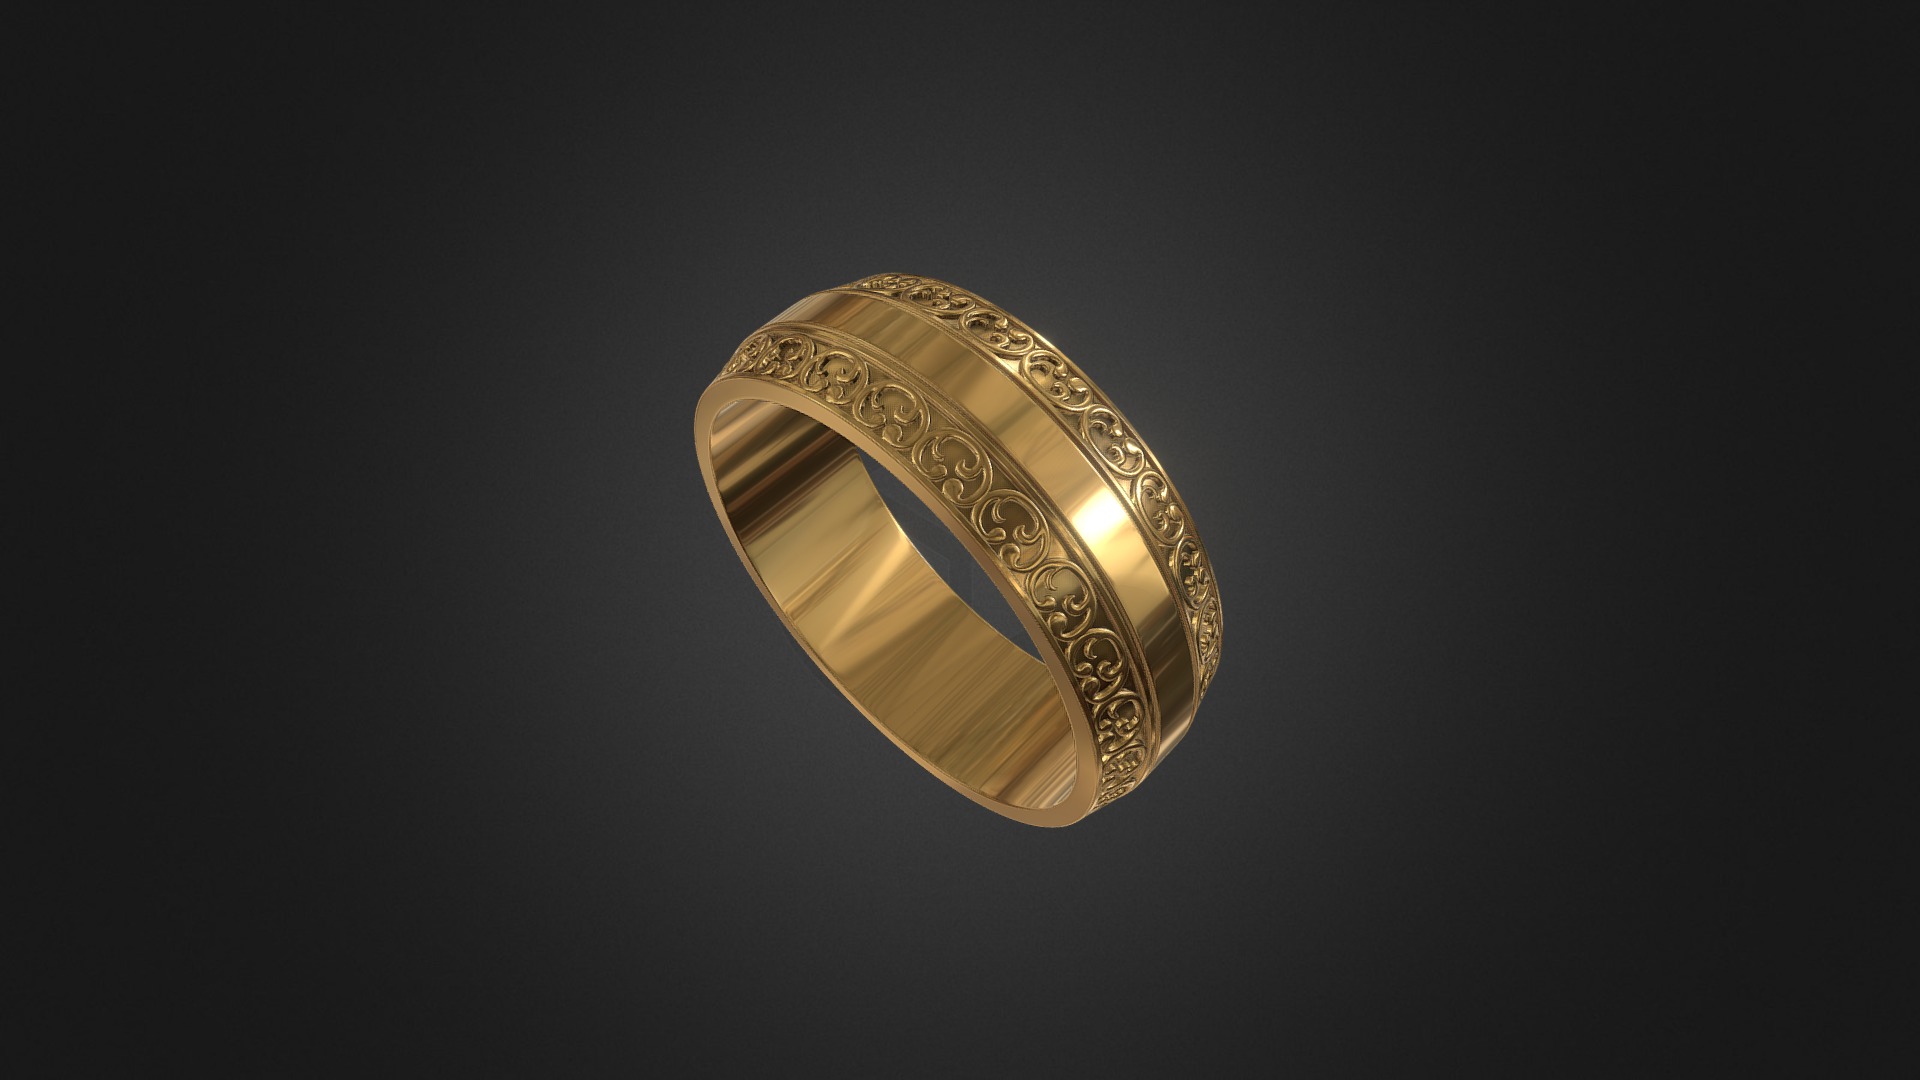 3D model 785 – Ring - This is a 3D model of the 785 - Ring. The 3D model is about a gold ring with diamonds.